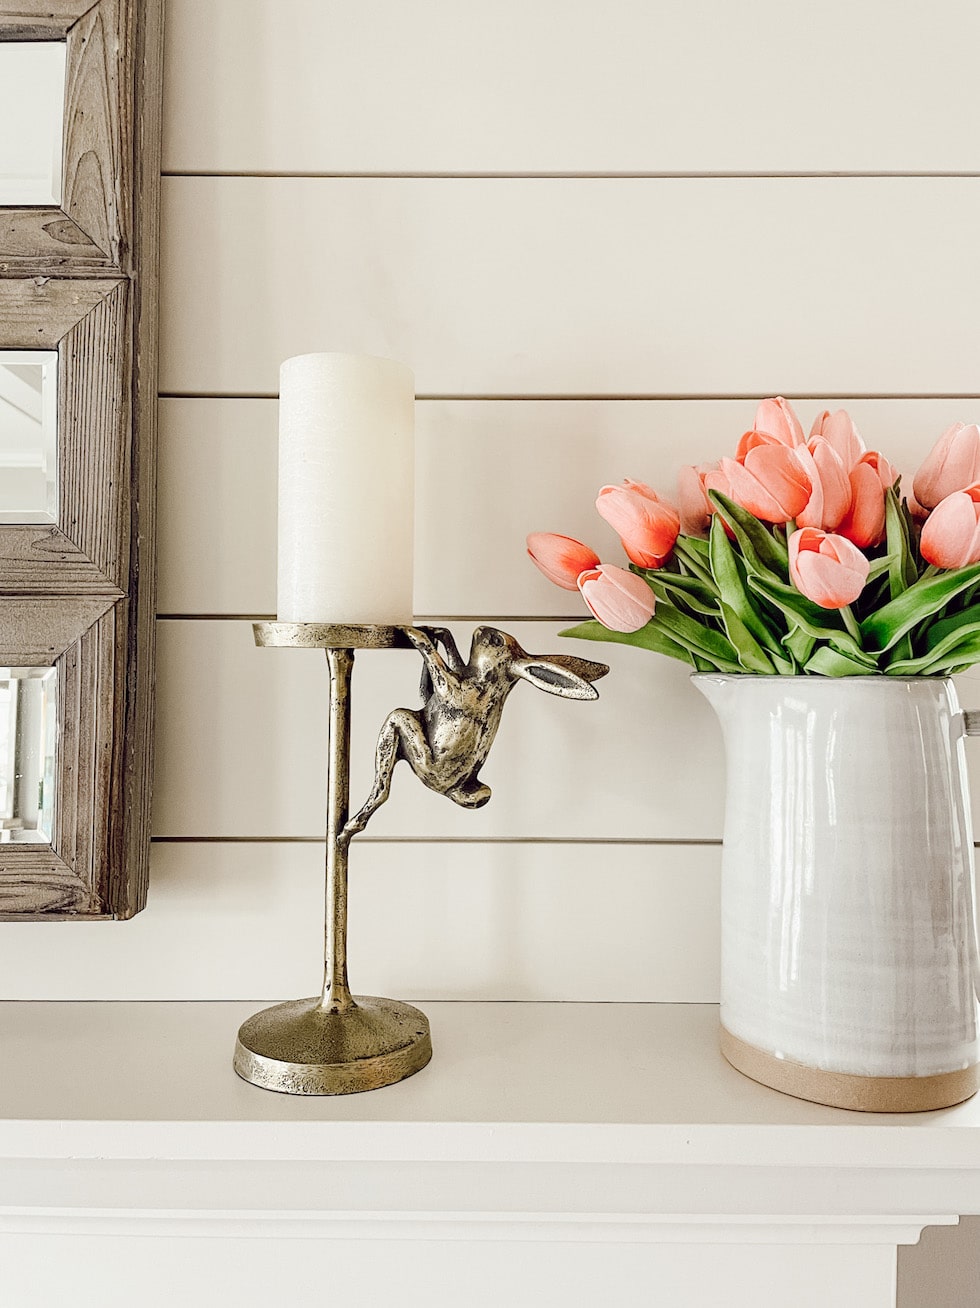 How to Decorate for Spring: Add a Whimsical Element